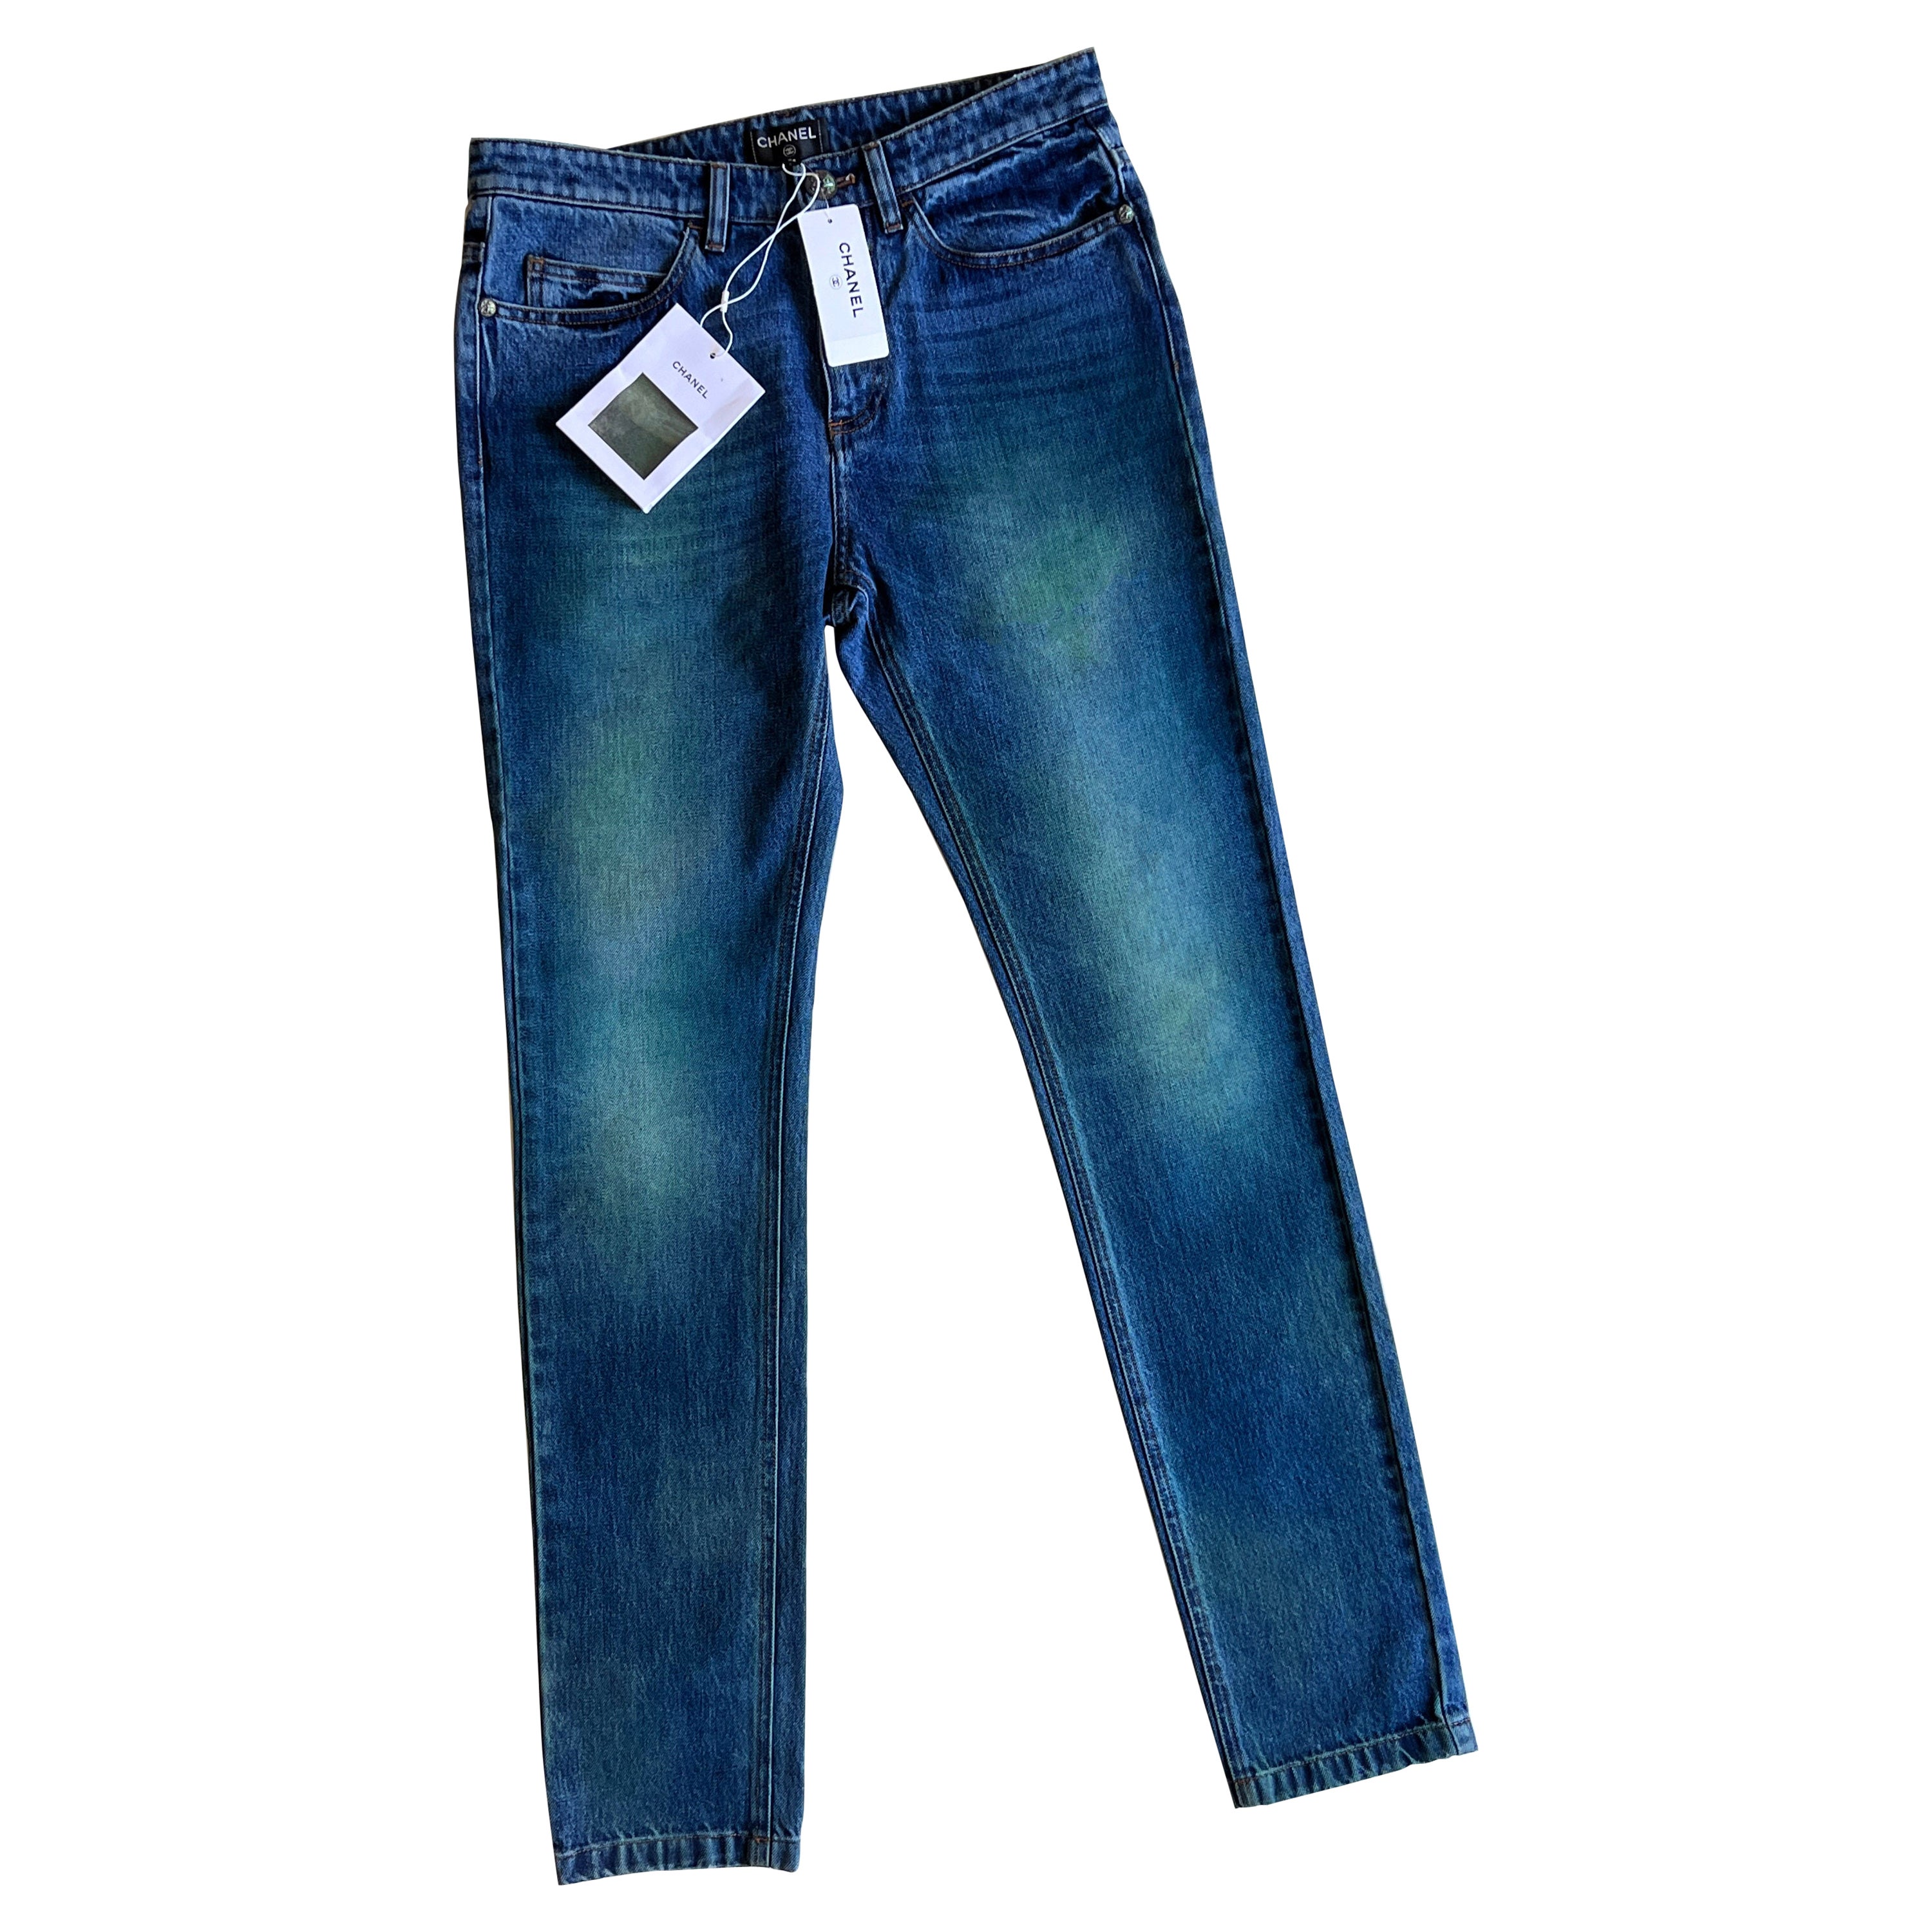 Chanel Cuba Collection Runway Jeans